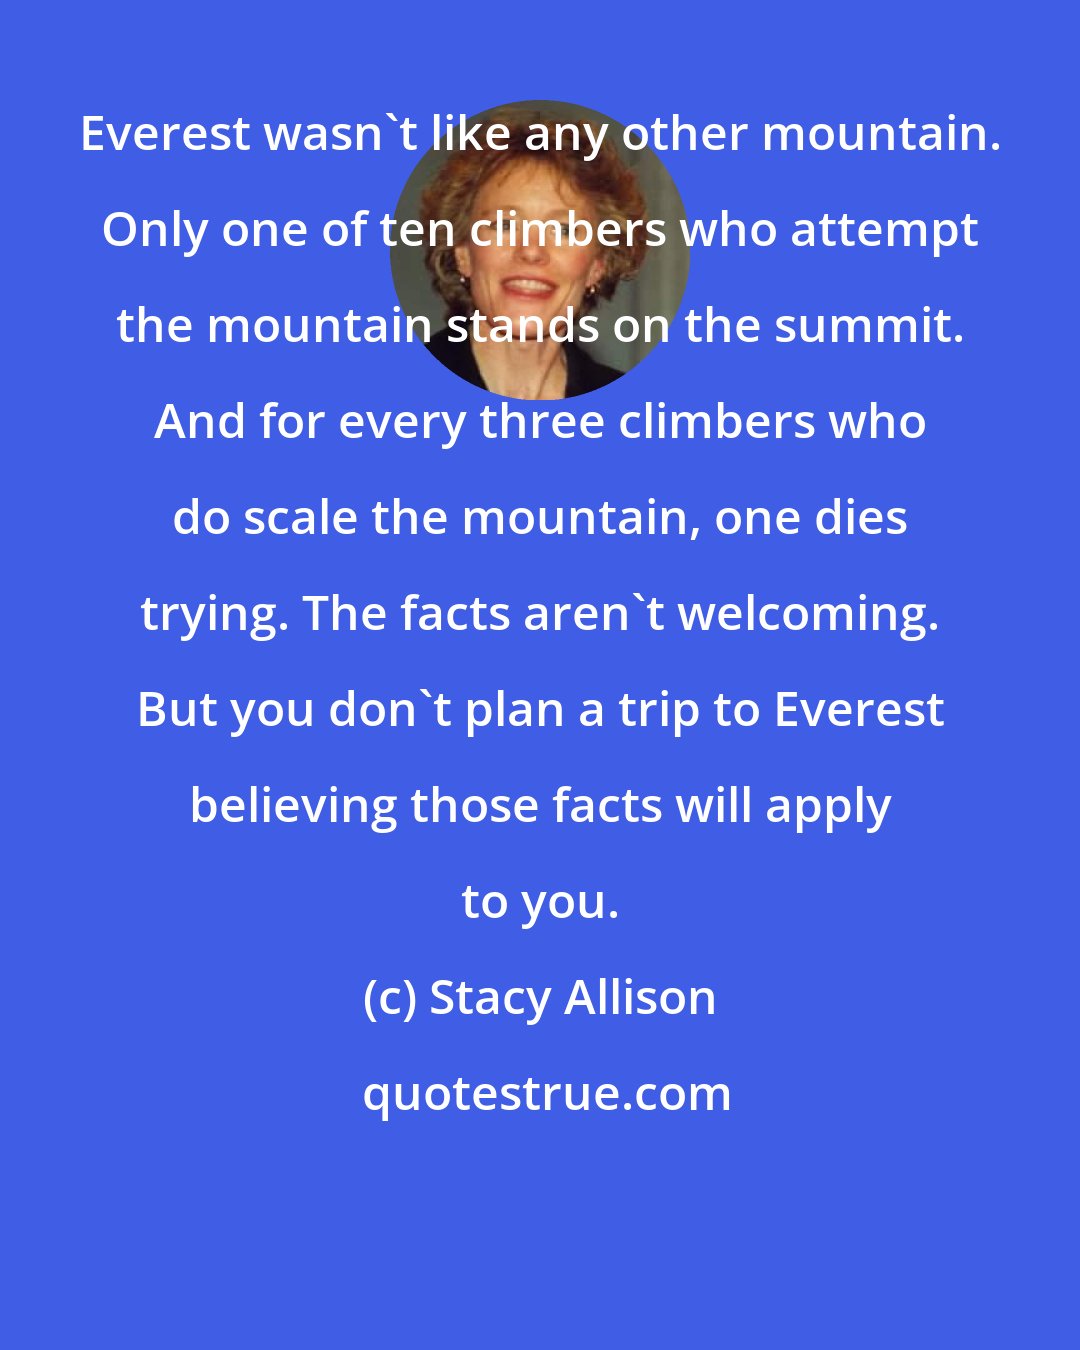 Stacy Allison: Everest wasn't like any other mountain. Only one of ten climbers who attempt the mountain stands on the summit. And for every three climbers who do scale the mountain, one dies trying. The facts aren't welcoming. But you don't plan a trip to Everest believing those facts will apply to you.